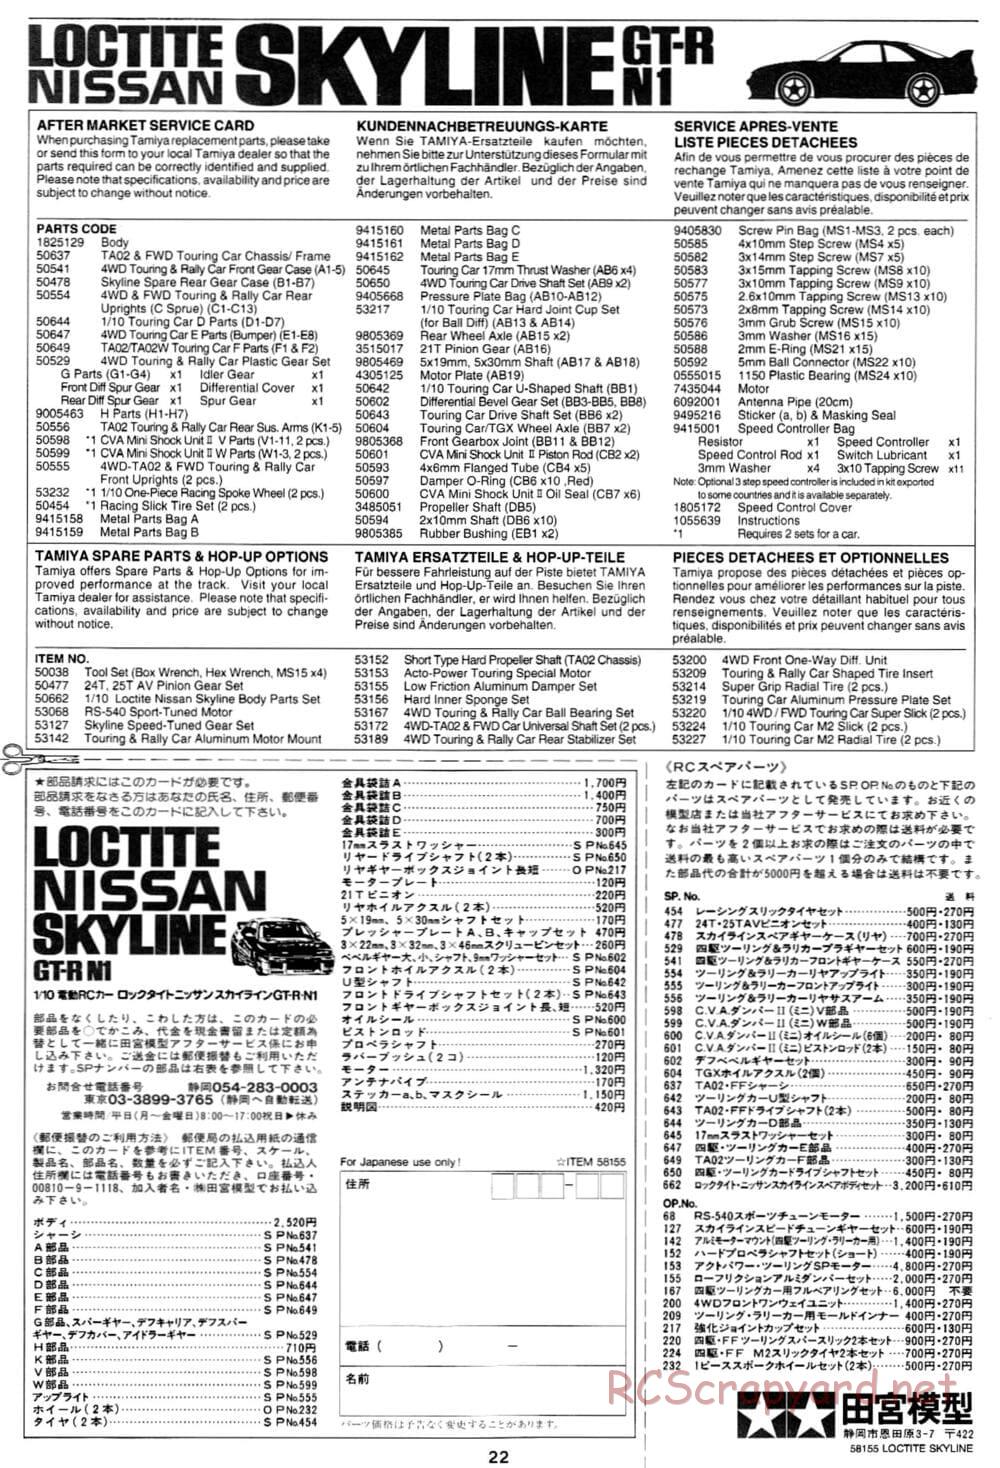 Tamiya - Loctite Nissan Skyline GT-R N1 - TA-02 Chassis - Manual - Page 23